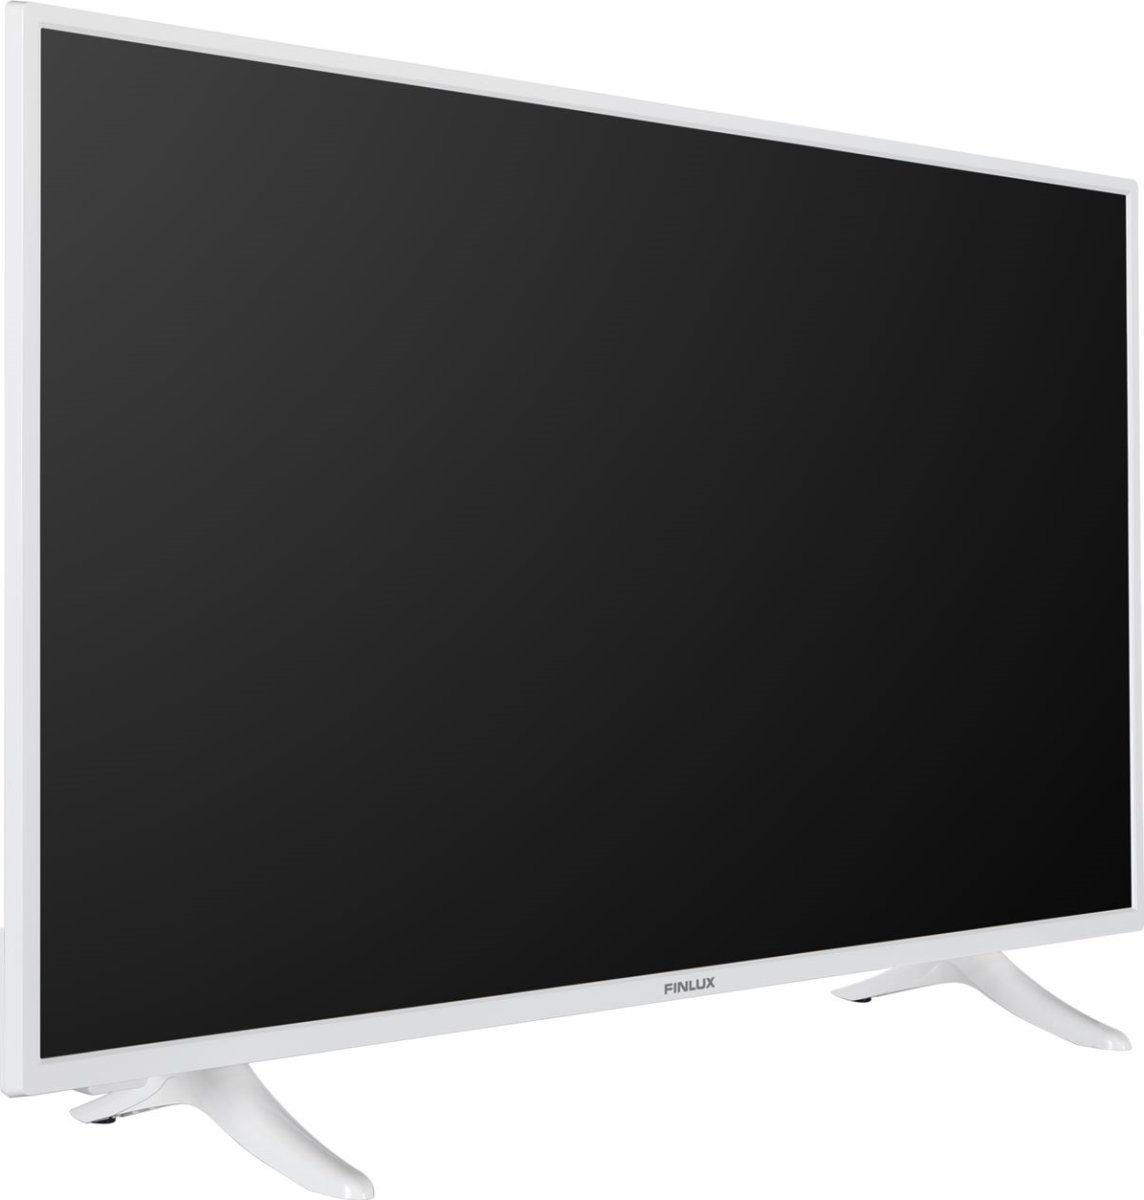 Finlux 43” Full HD android TV